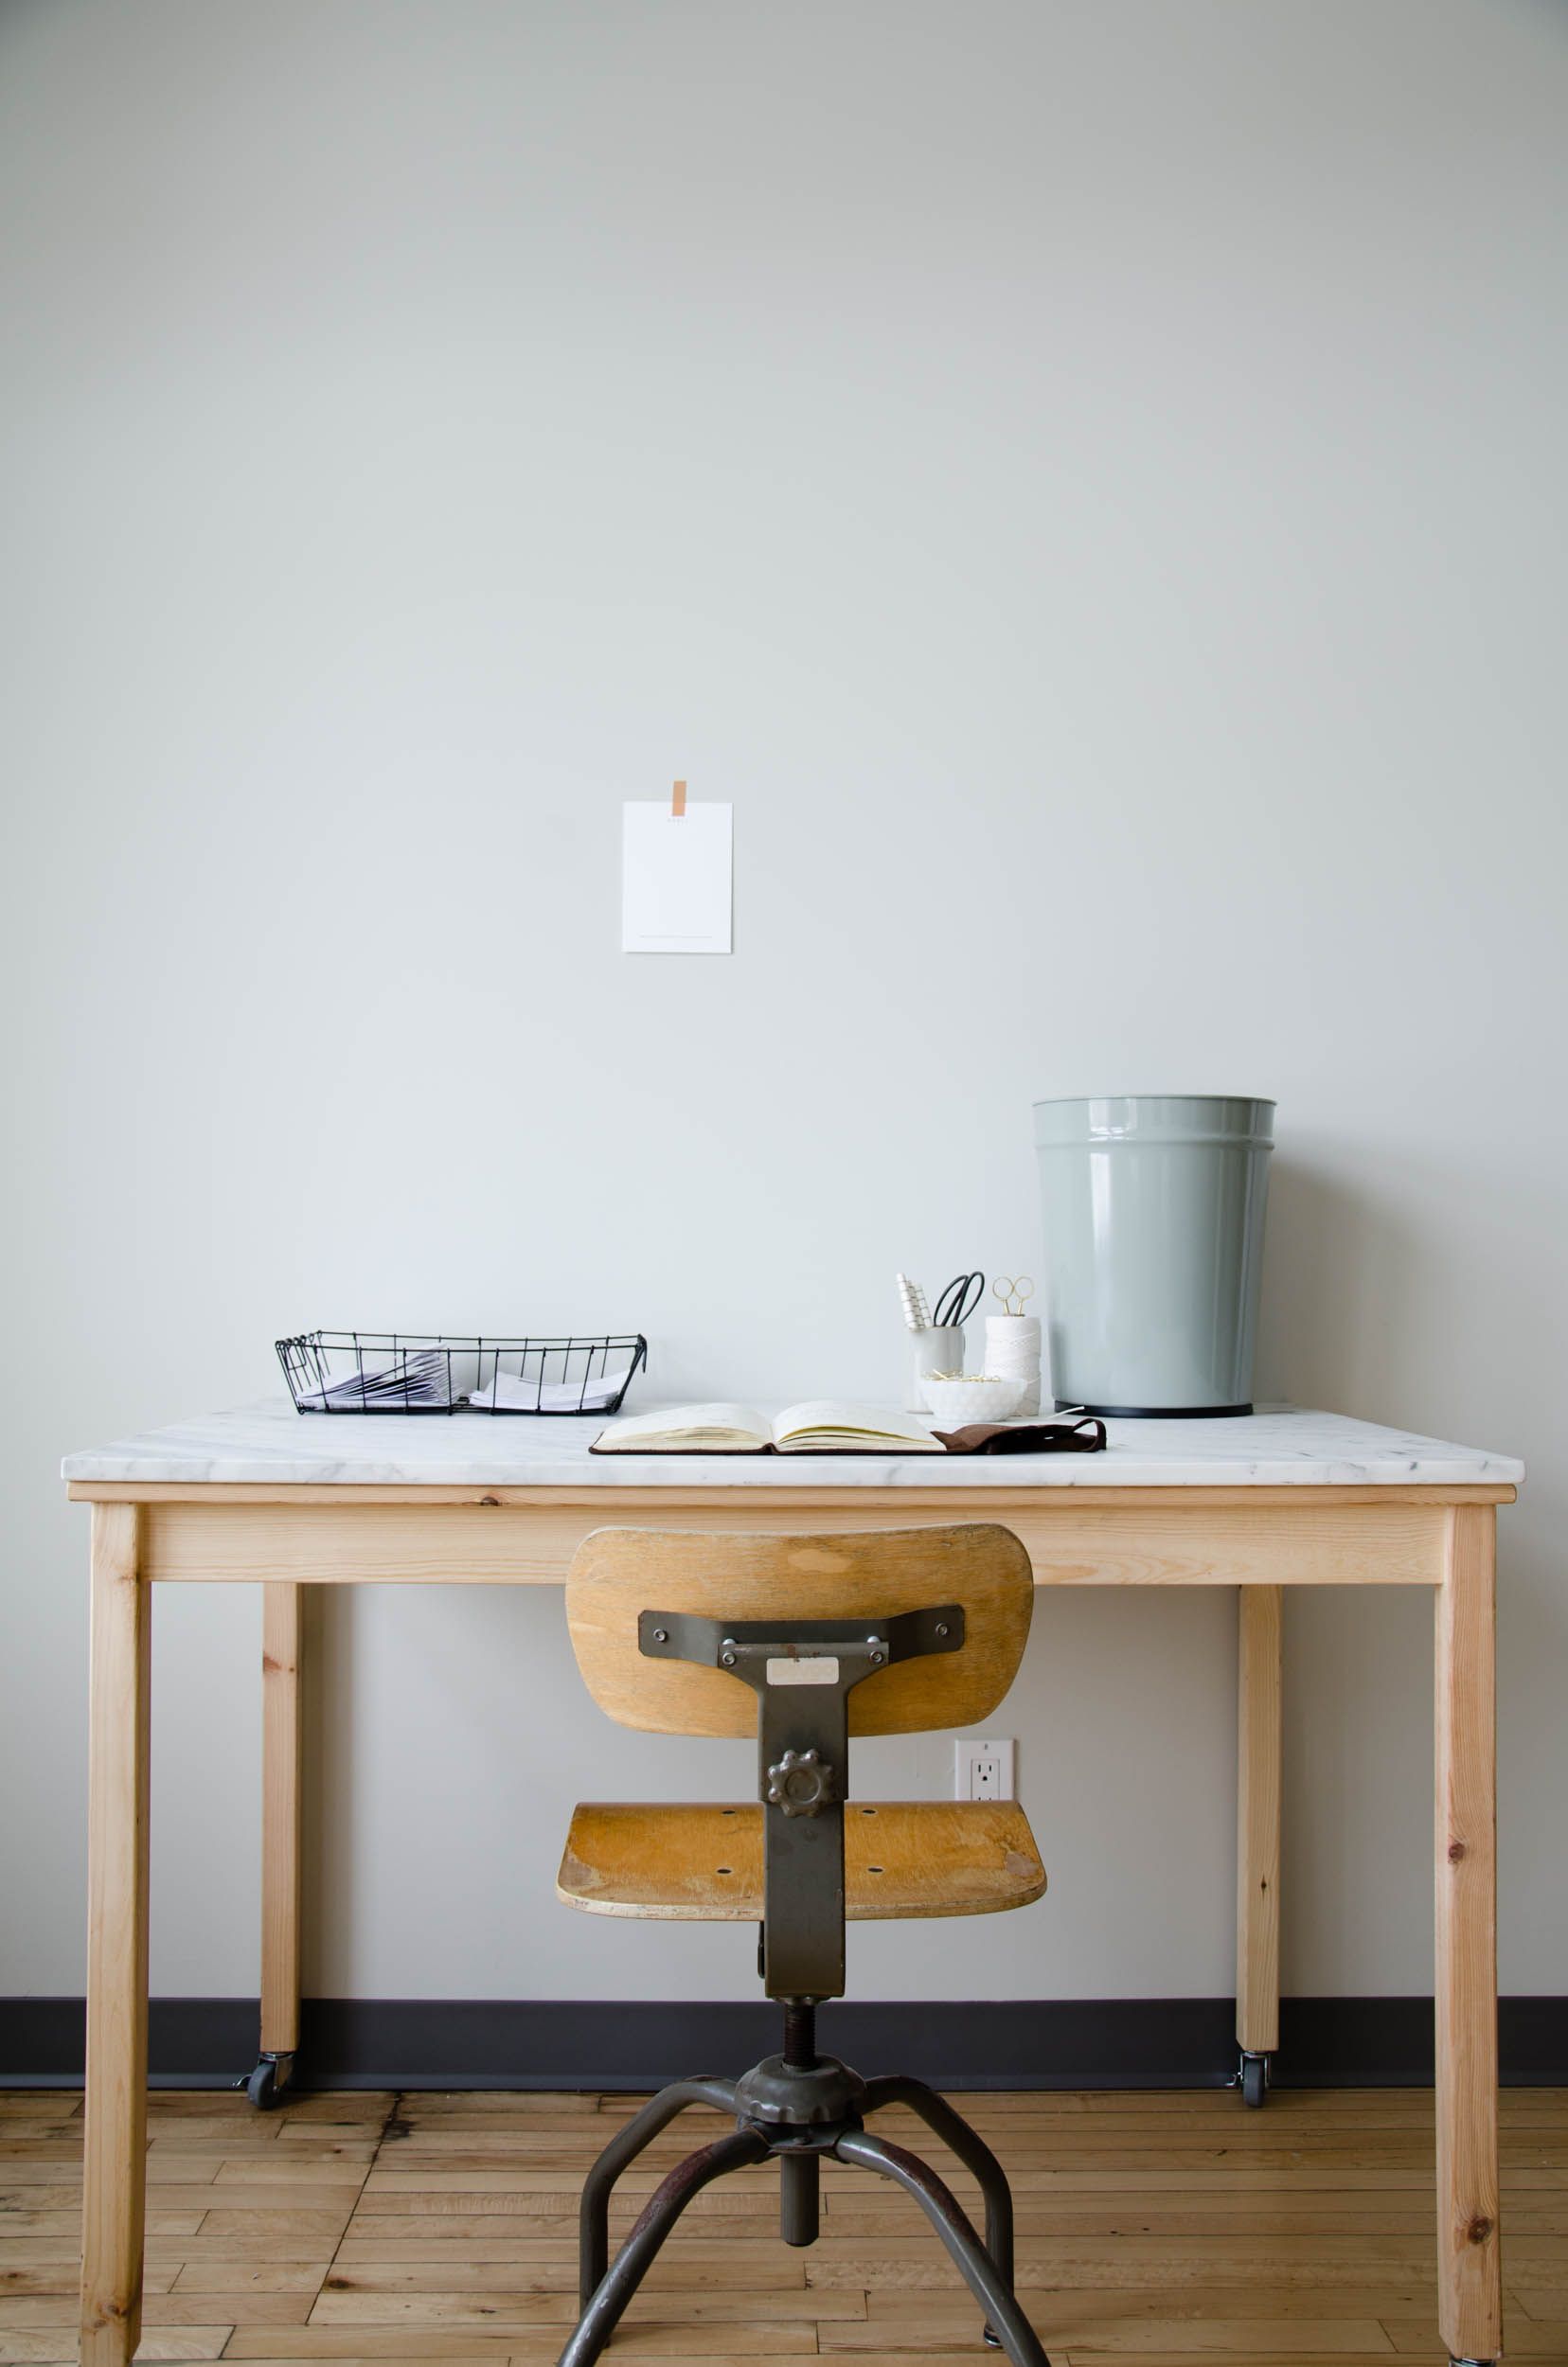 Custom marble tabletop and casters is one of those upgrades that would turn the INGO table into a luxorious piece that is perfect for organizing a workspace in a small apartment.